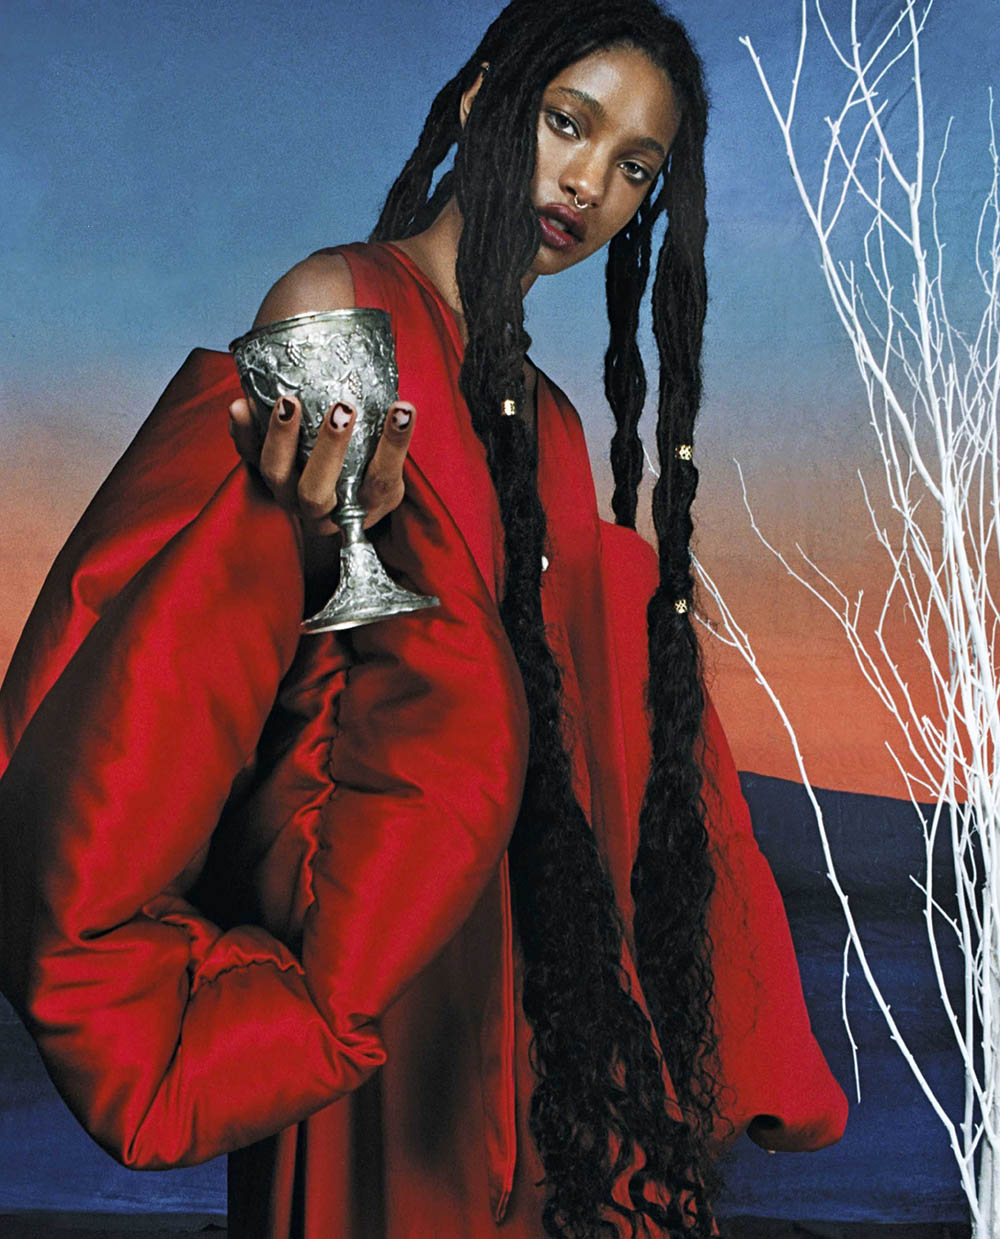 Jaden and Willow Smith cover Vogue Italia October 2019 by Hugo Comte